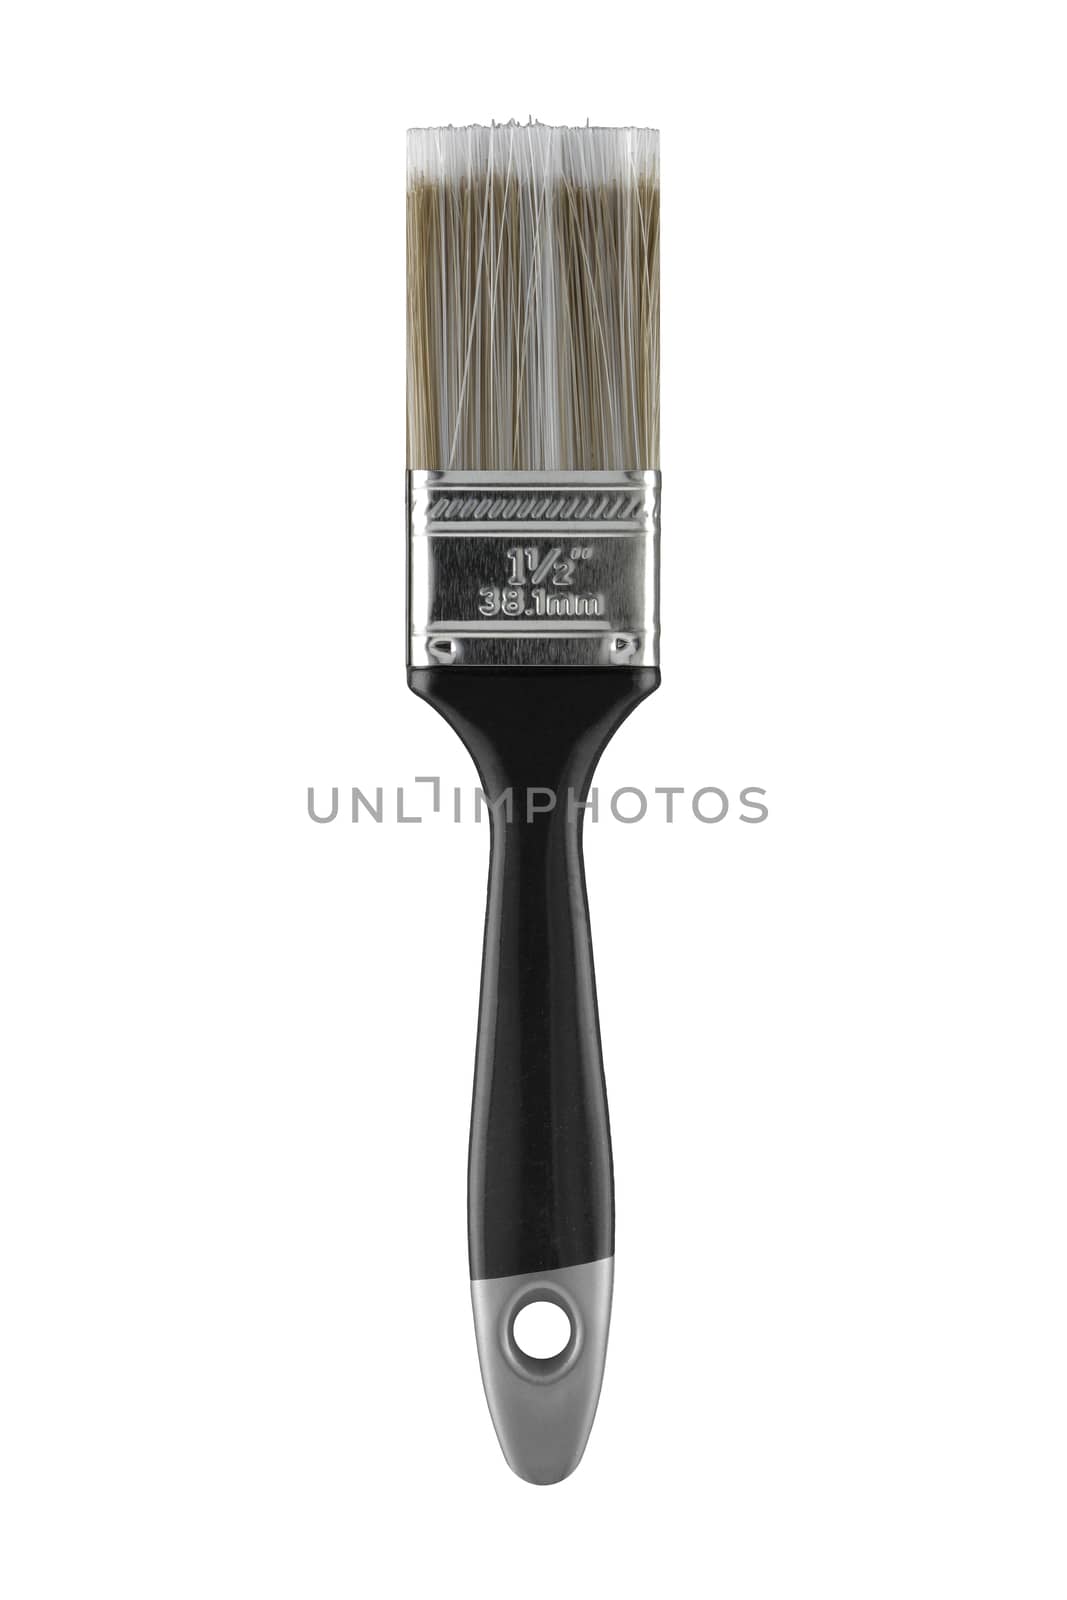 A 1 1/2" 38.1mm one and a half inch decorators paint brush on white with clipping path